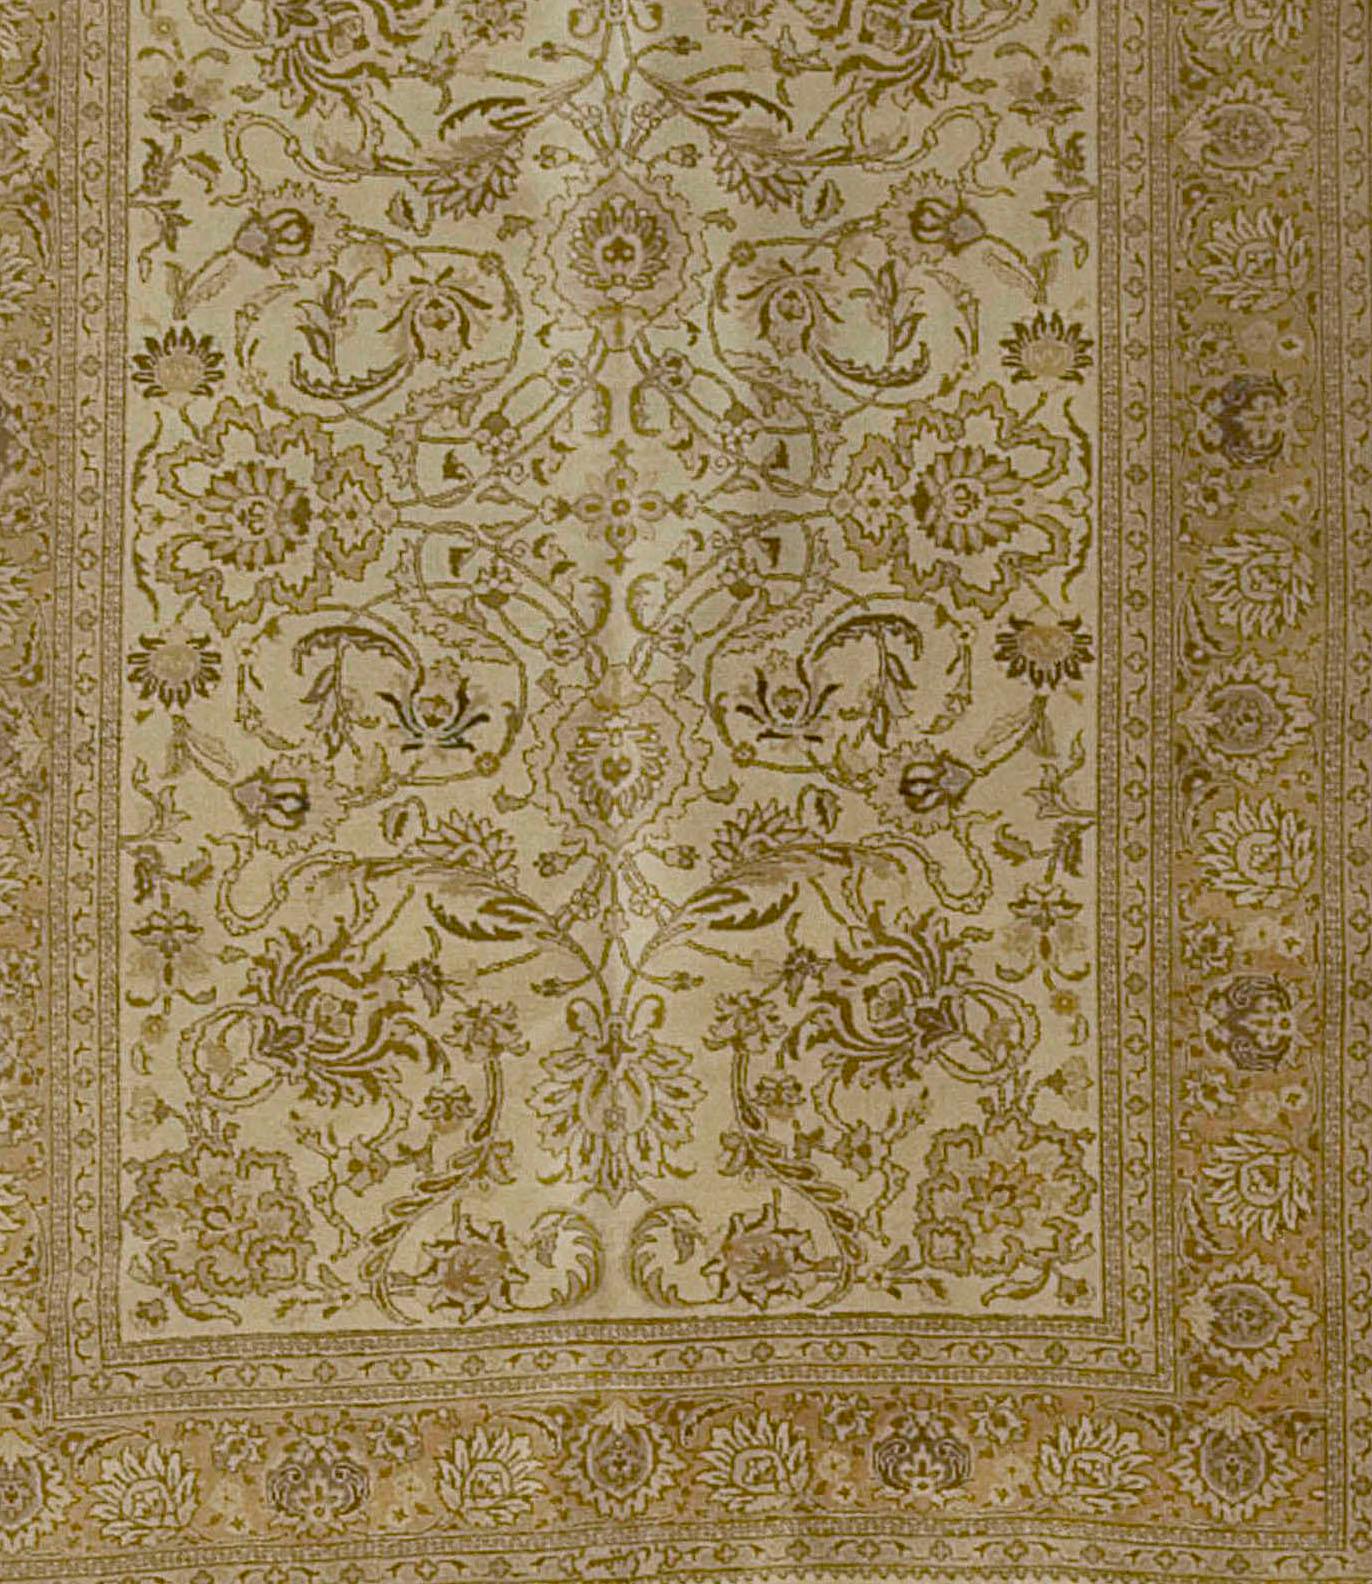 Antique Persian Tabriz, Circa 1920 6'9 x 9'3 In Good Condition For Sale In New York, NY